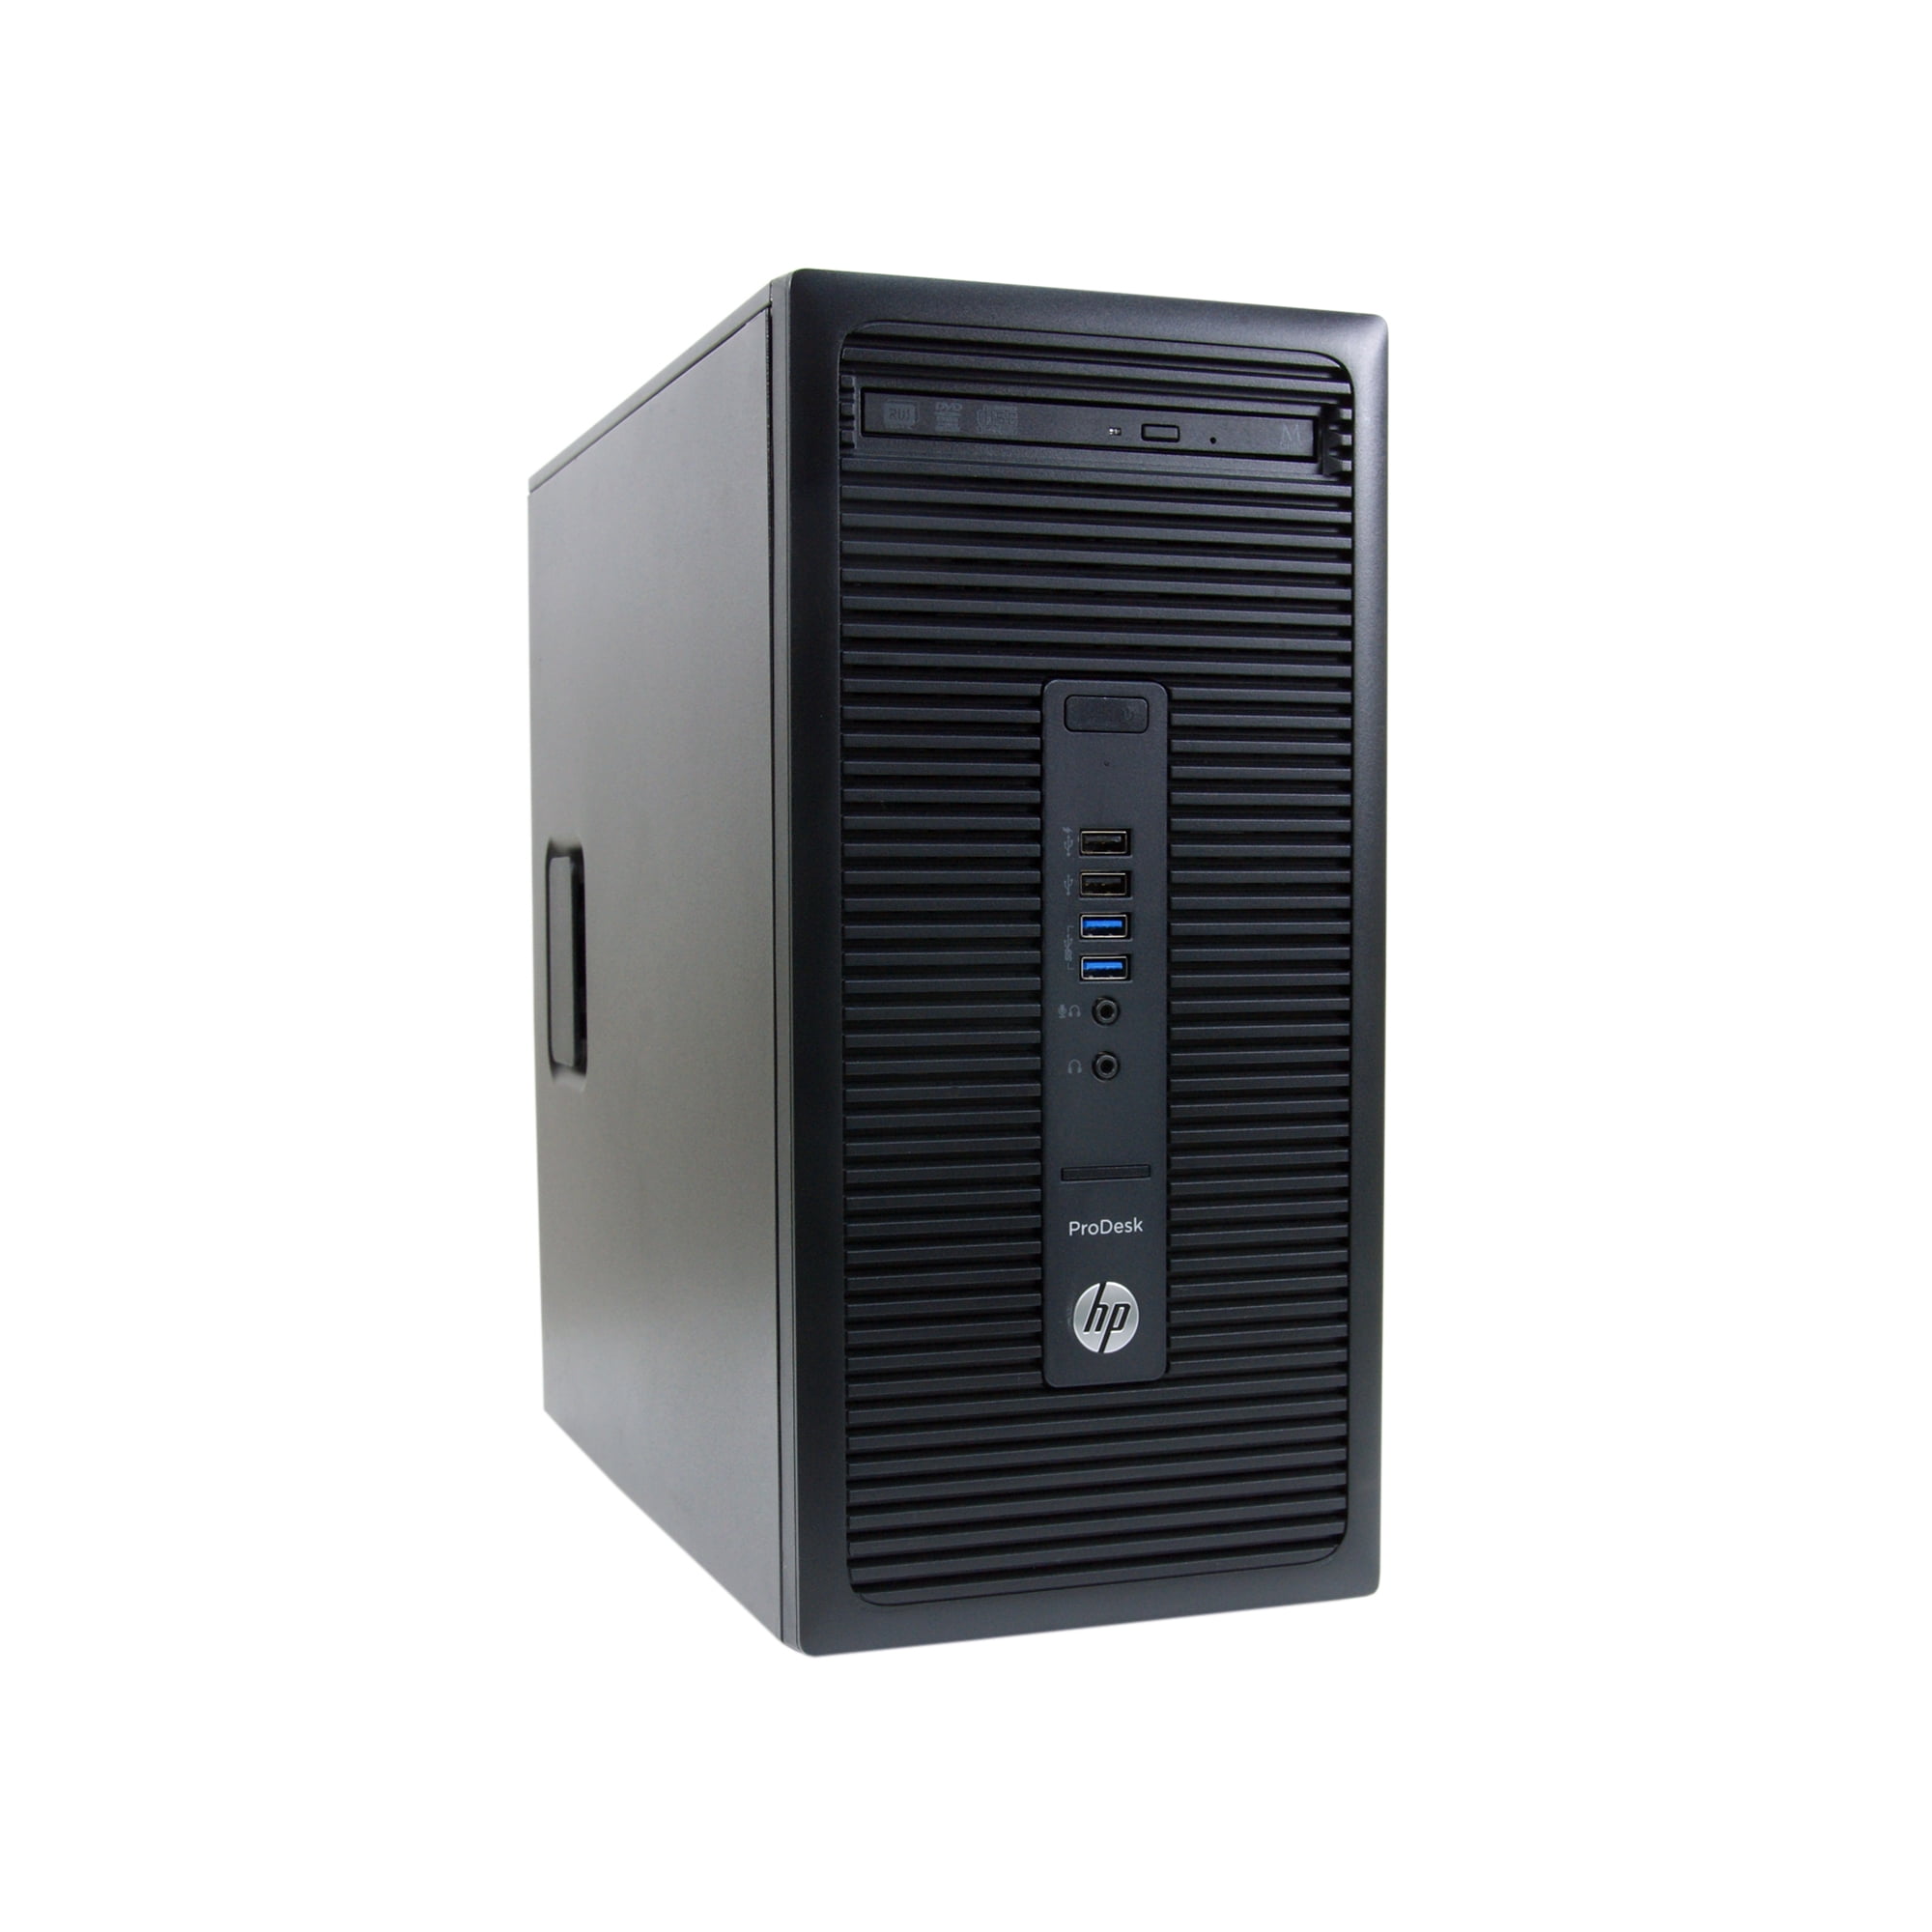 Used HP 600 G2-T Desktop PC with Intel Core i7-6700 3.4GHz